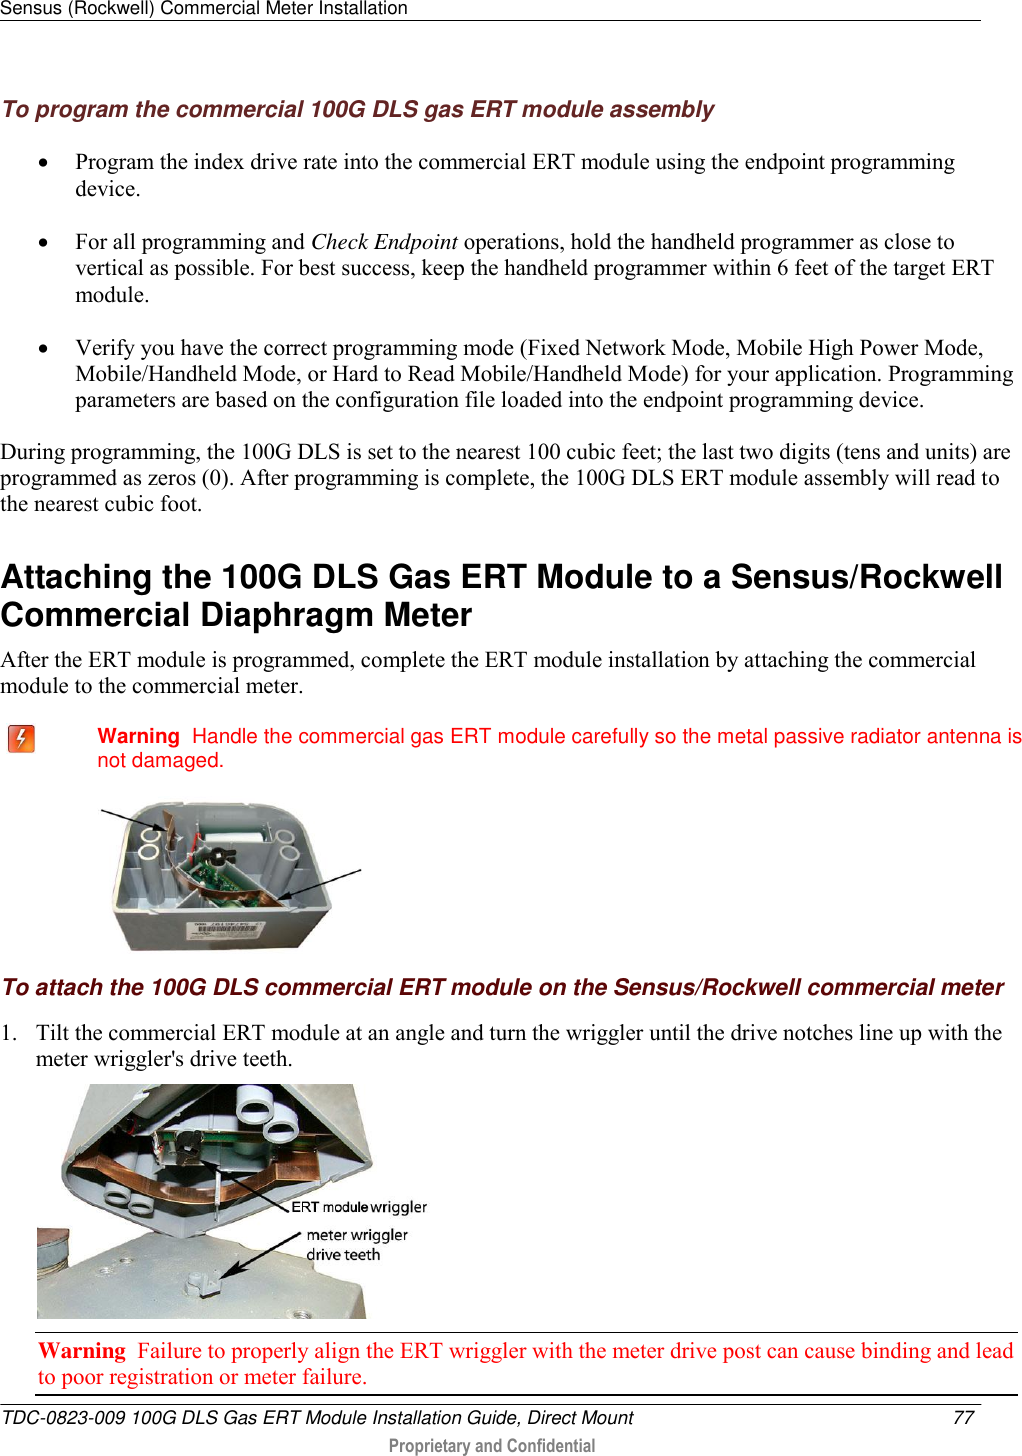 Sensus (Rockwell) Commercial Meter Installation   TDC-0823-009 100G DLS Gas ERT Module Installation Guide, Direct Mount  77   Proprietary and Confidential     To program the commercial 100G DLS gas ERT module assembly  Program the index drive rate into the commercial ERT module using the endpoint programming device.   For all programming and Check Endpoint operations, hold the handheld programmer as close to vertical as possible. For best success, keep the handheld programmer within 6 feet of the target ERT module.   Verify you have the correct programming mode (Fixed Network Mode, Mobile High Power Mode, Mobile/Handheld Mode, or Hard to Read Mobile/Handheld Mode) for your application. Programming parameters are based on the configuration file loaded into the endpoint programming device.  During programming, the 100G DLS is set to the nearest 100 cubic feet; the last two digits (tens and units) are programmed as zeros (0). After programming is complete, the 100G DLS ERT module assembly will read to the nearest cubic foot.  Attaching the 100G DLS Gas ERT Module to a Sensus/Rockwell Commercial Diaphragm Meter After the ERT module is programmed, complete the ERT module installation by attaching the commercial module to the commercial meter.    Warning  Handle the commercial gas ERT module carefully so the metal passive radiator antenna is not damaged.   To attach the 100G DLS commercial ERT module on the Sensus/Rockwell commercial meter 1. Tilt the commercial ERT module at an angle and turn the wriggler until the drive notches line up with the meter wriggler&apos;s drive teeth.  Warning  Failure to properly align the ERT wriggler with the meter drive post can cause binding and lead to poor registration or meter failure.   